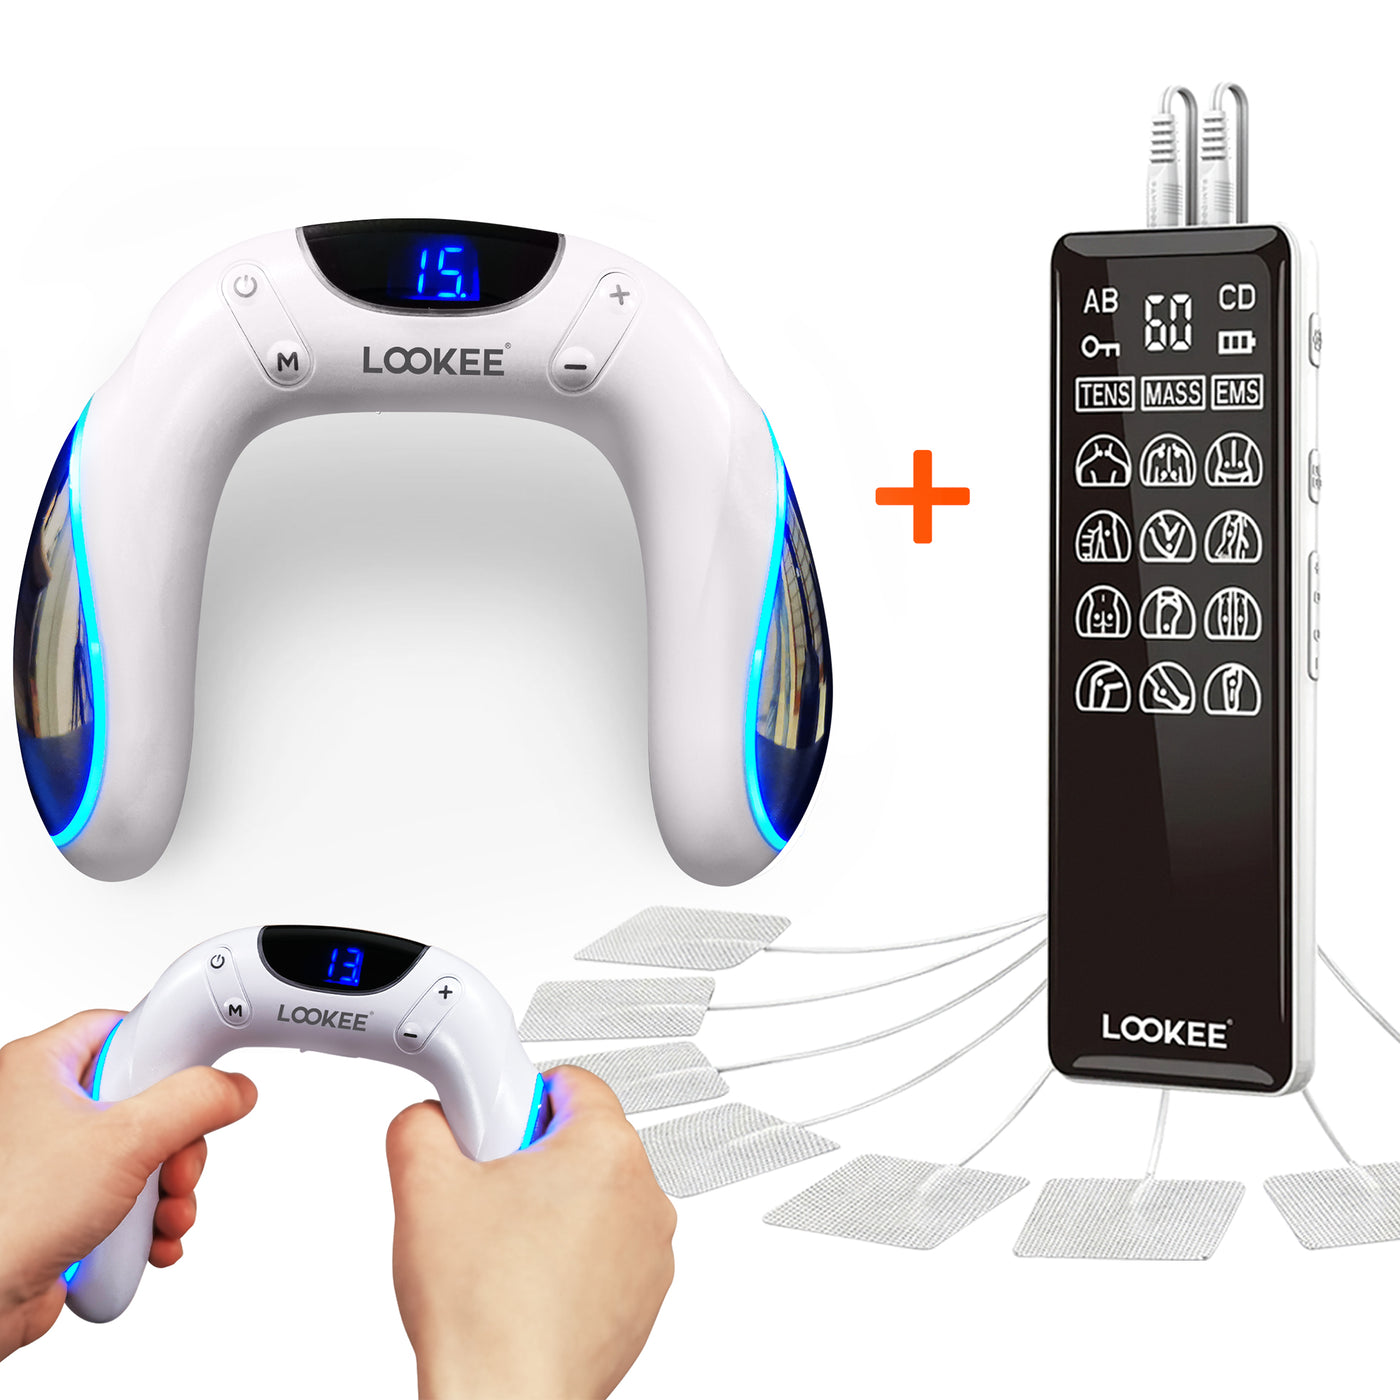 LOOKEE® Muscle Wellness Twin Pack: LOOKEE® A8 Arm Workout EMS Exerciser + LOOKEE® LK113 Premium LED 4-Channel TENS Unit EMS Massage Muscle Stimulator